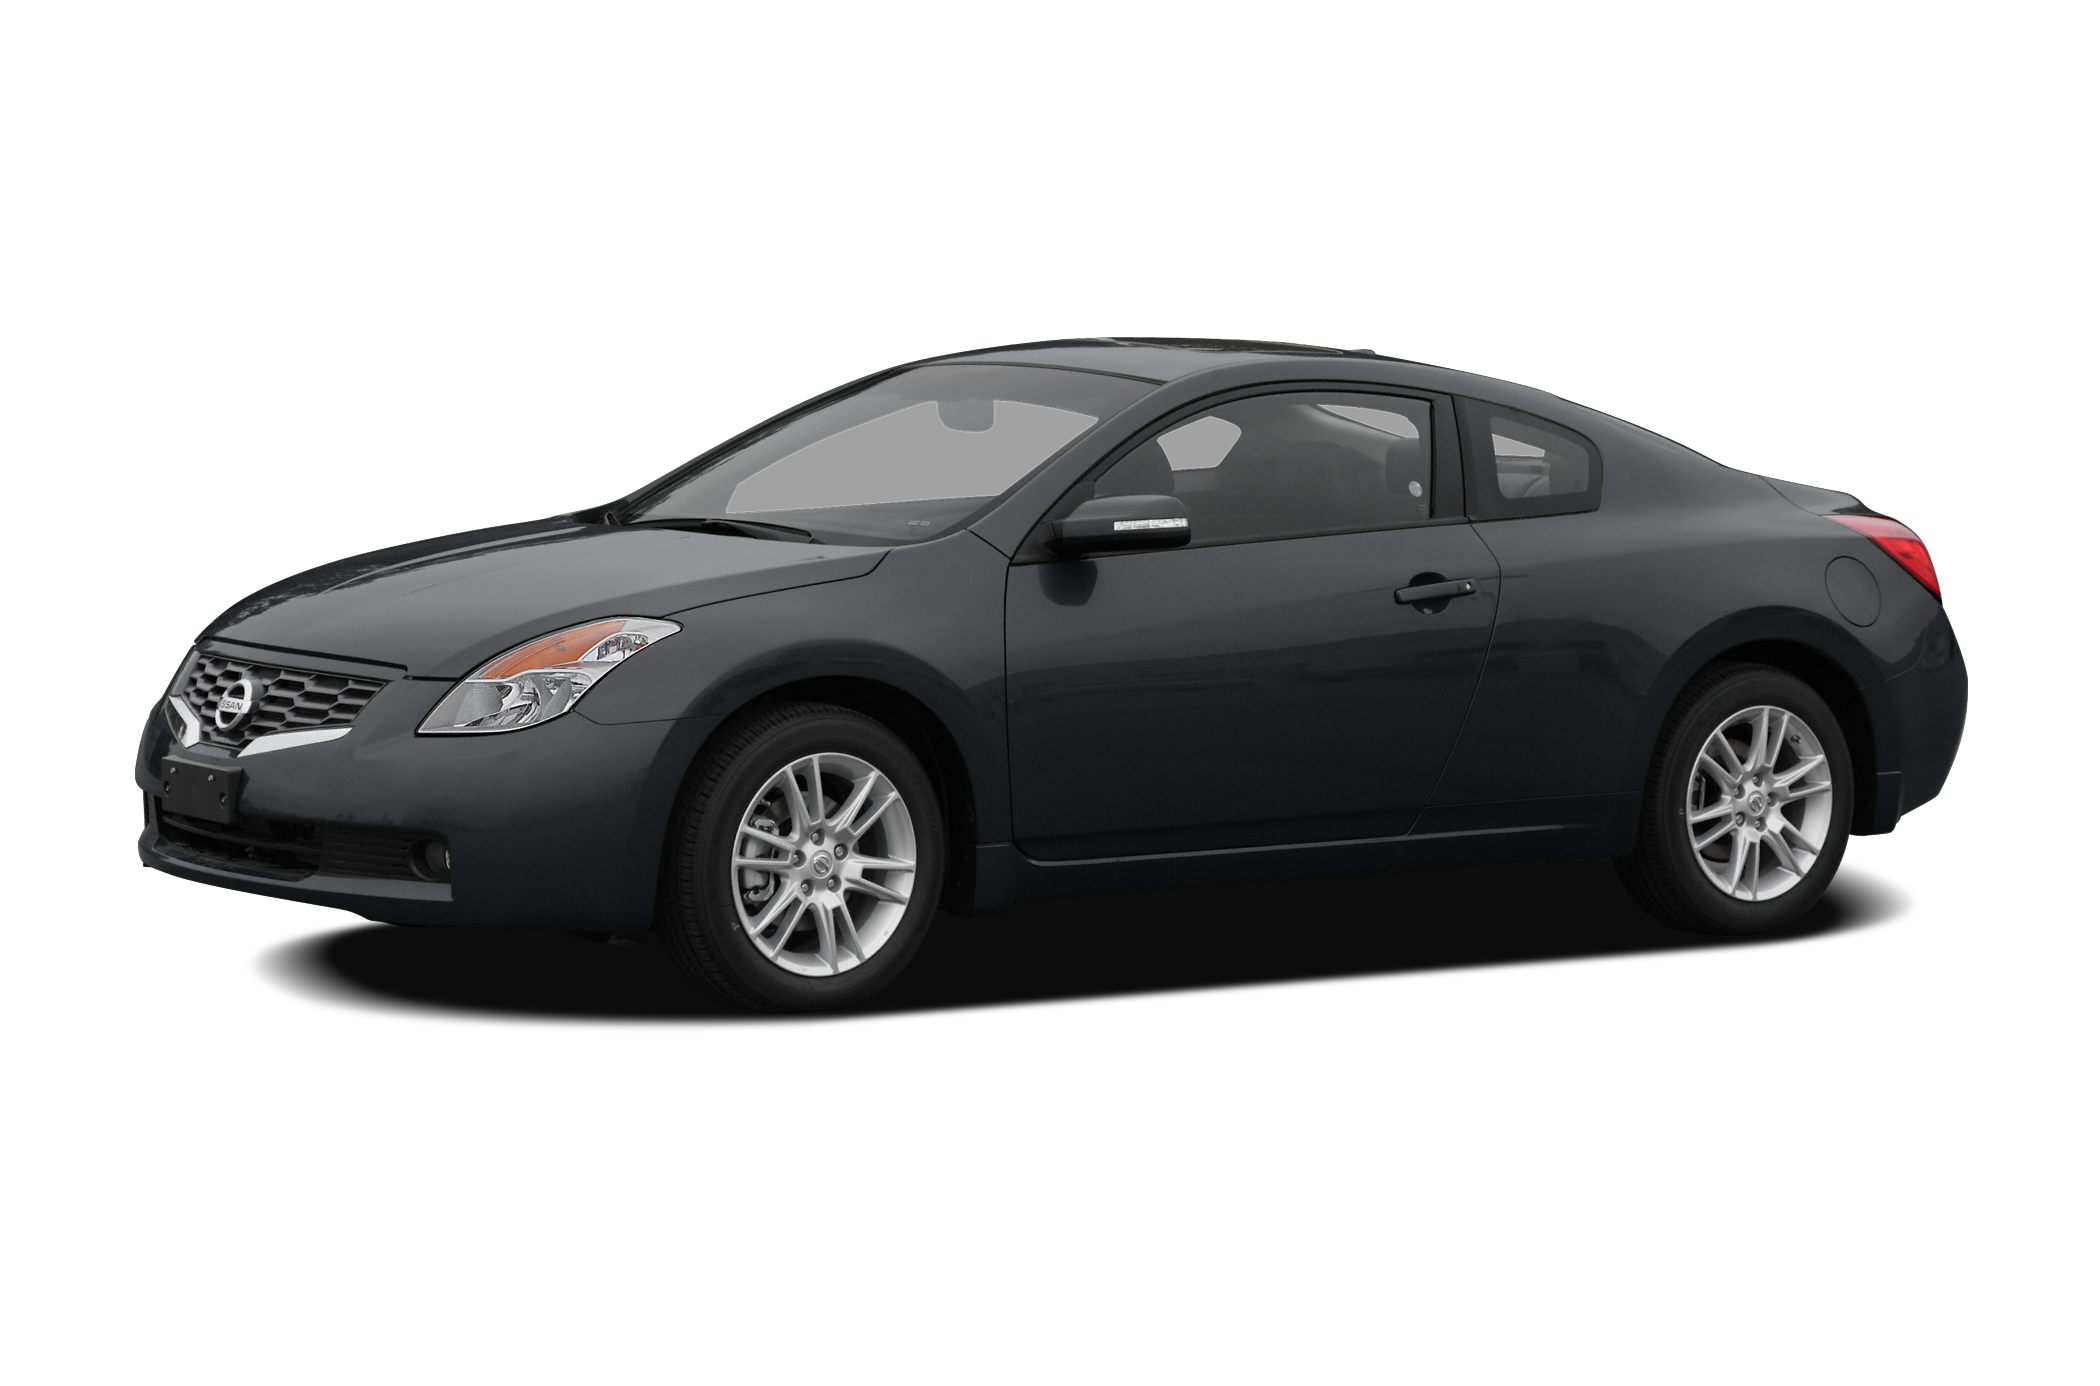 2008 Nissan Altima 2 5 S 2dr Coupe Pictures